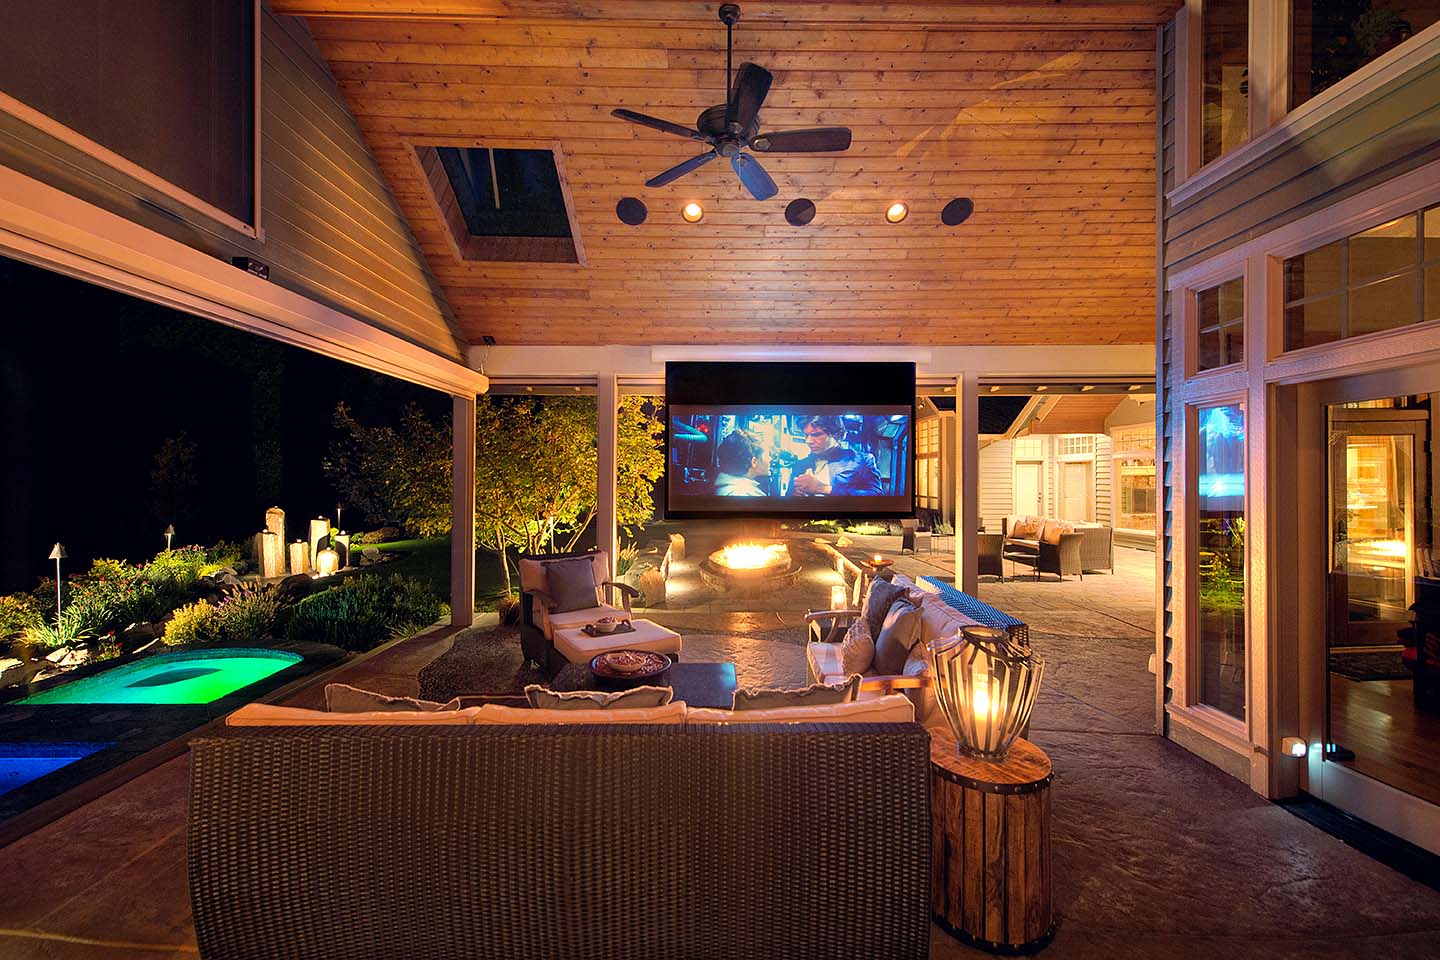 beautiful rustic outdoor living area with projector and wood roofing